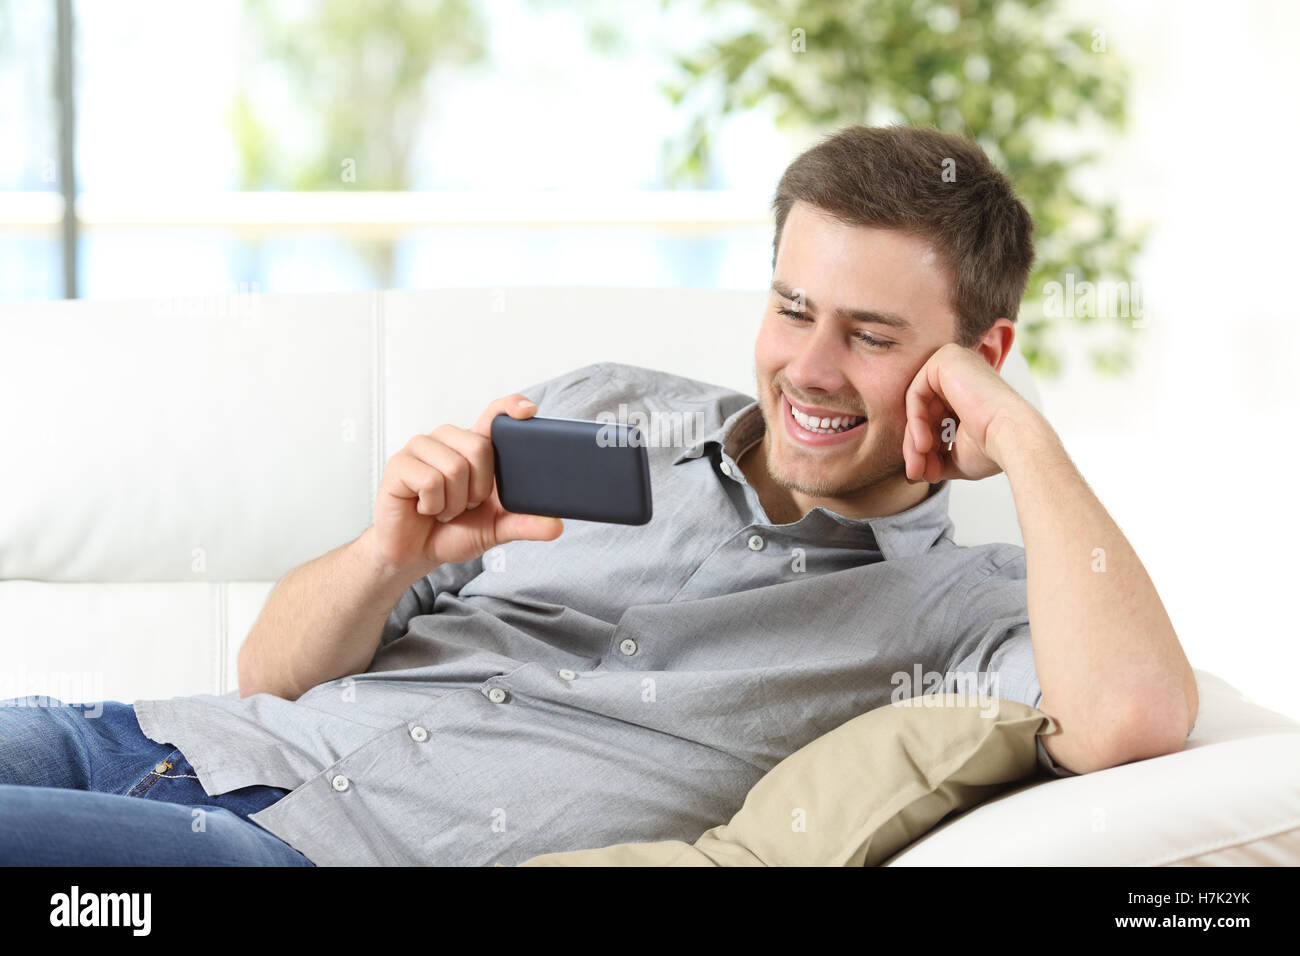 Happy guy enjoying watching entertainment content on a phone sitting on a couch at home Stock Photo